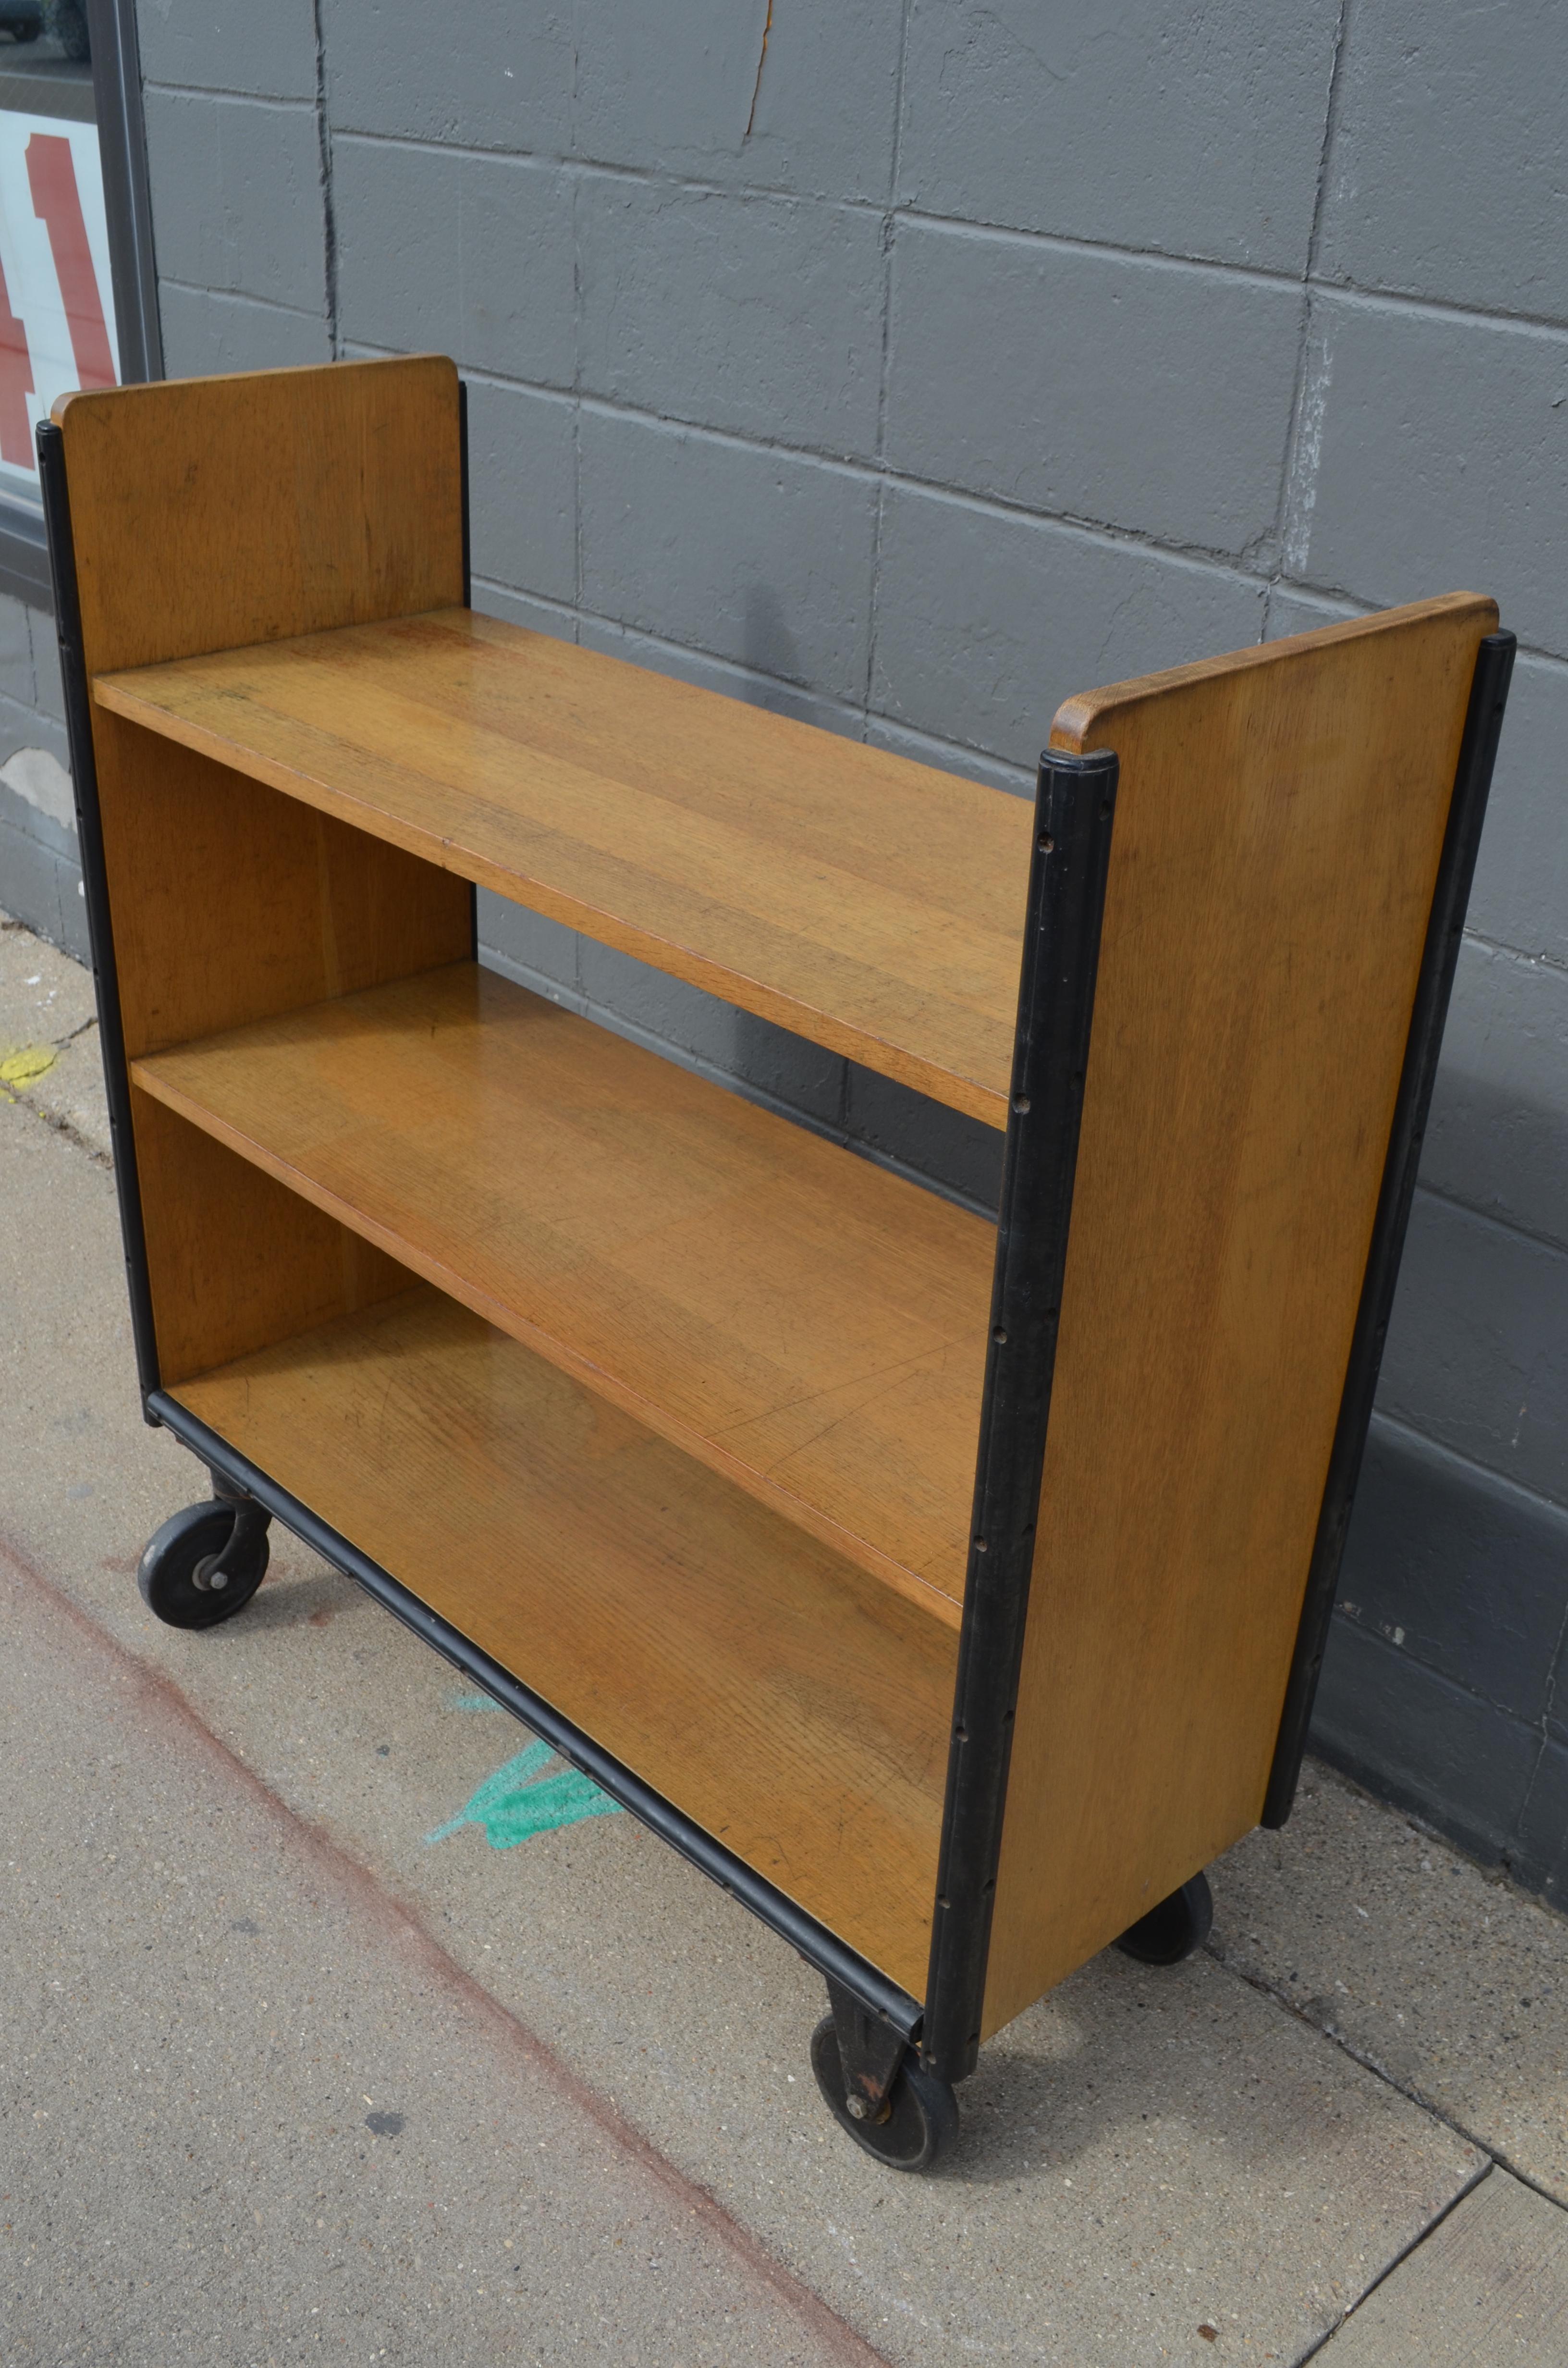 Rubber Midcentury Book Shelving Cart of Oak on Wheels from Midwestern Public Library